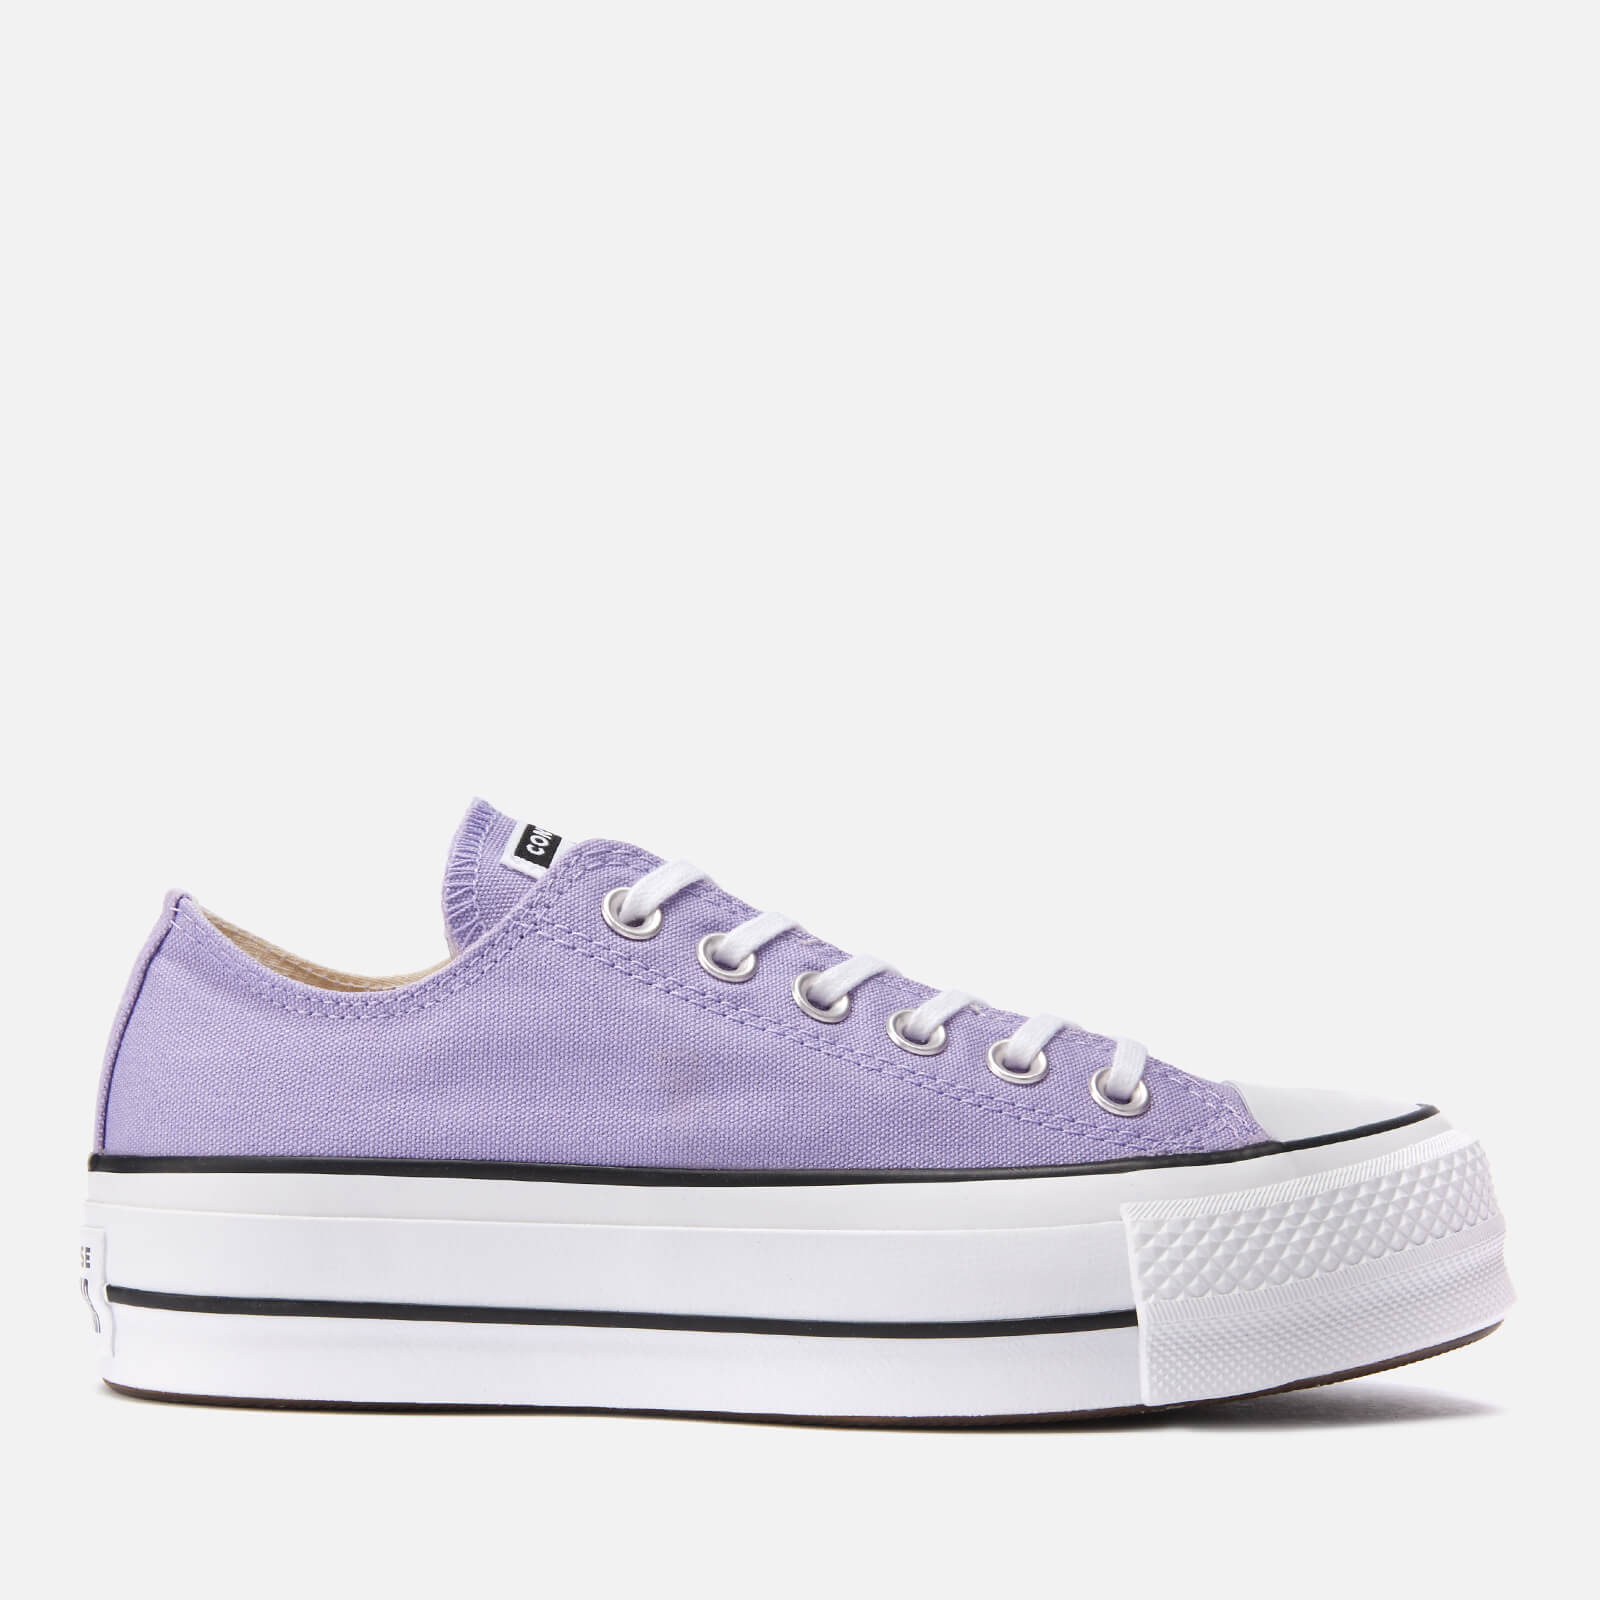 Converse Women's Chuck Taylor All Star Lift Ox Trainers - Washed Lilac/Black/White